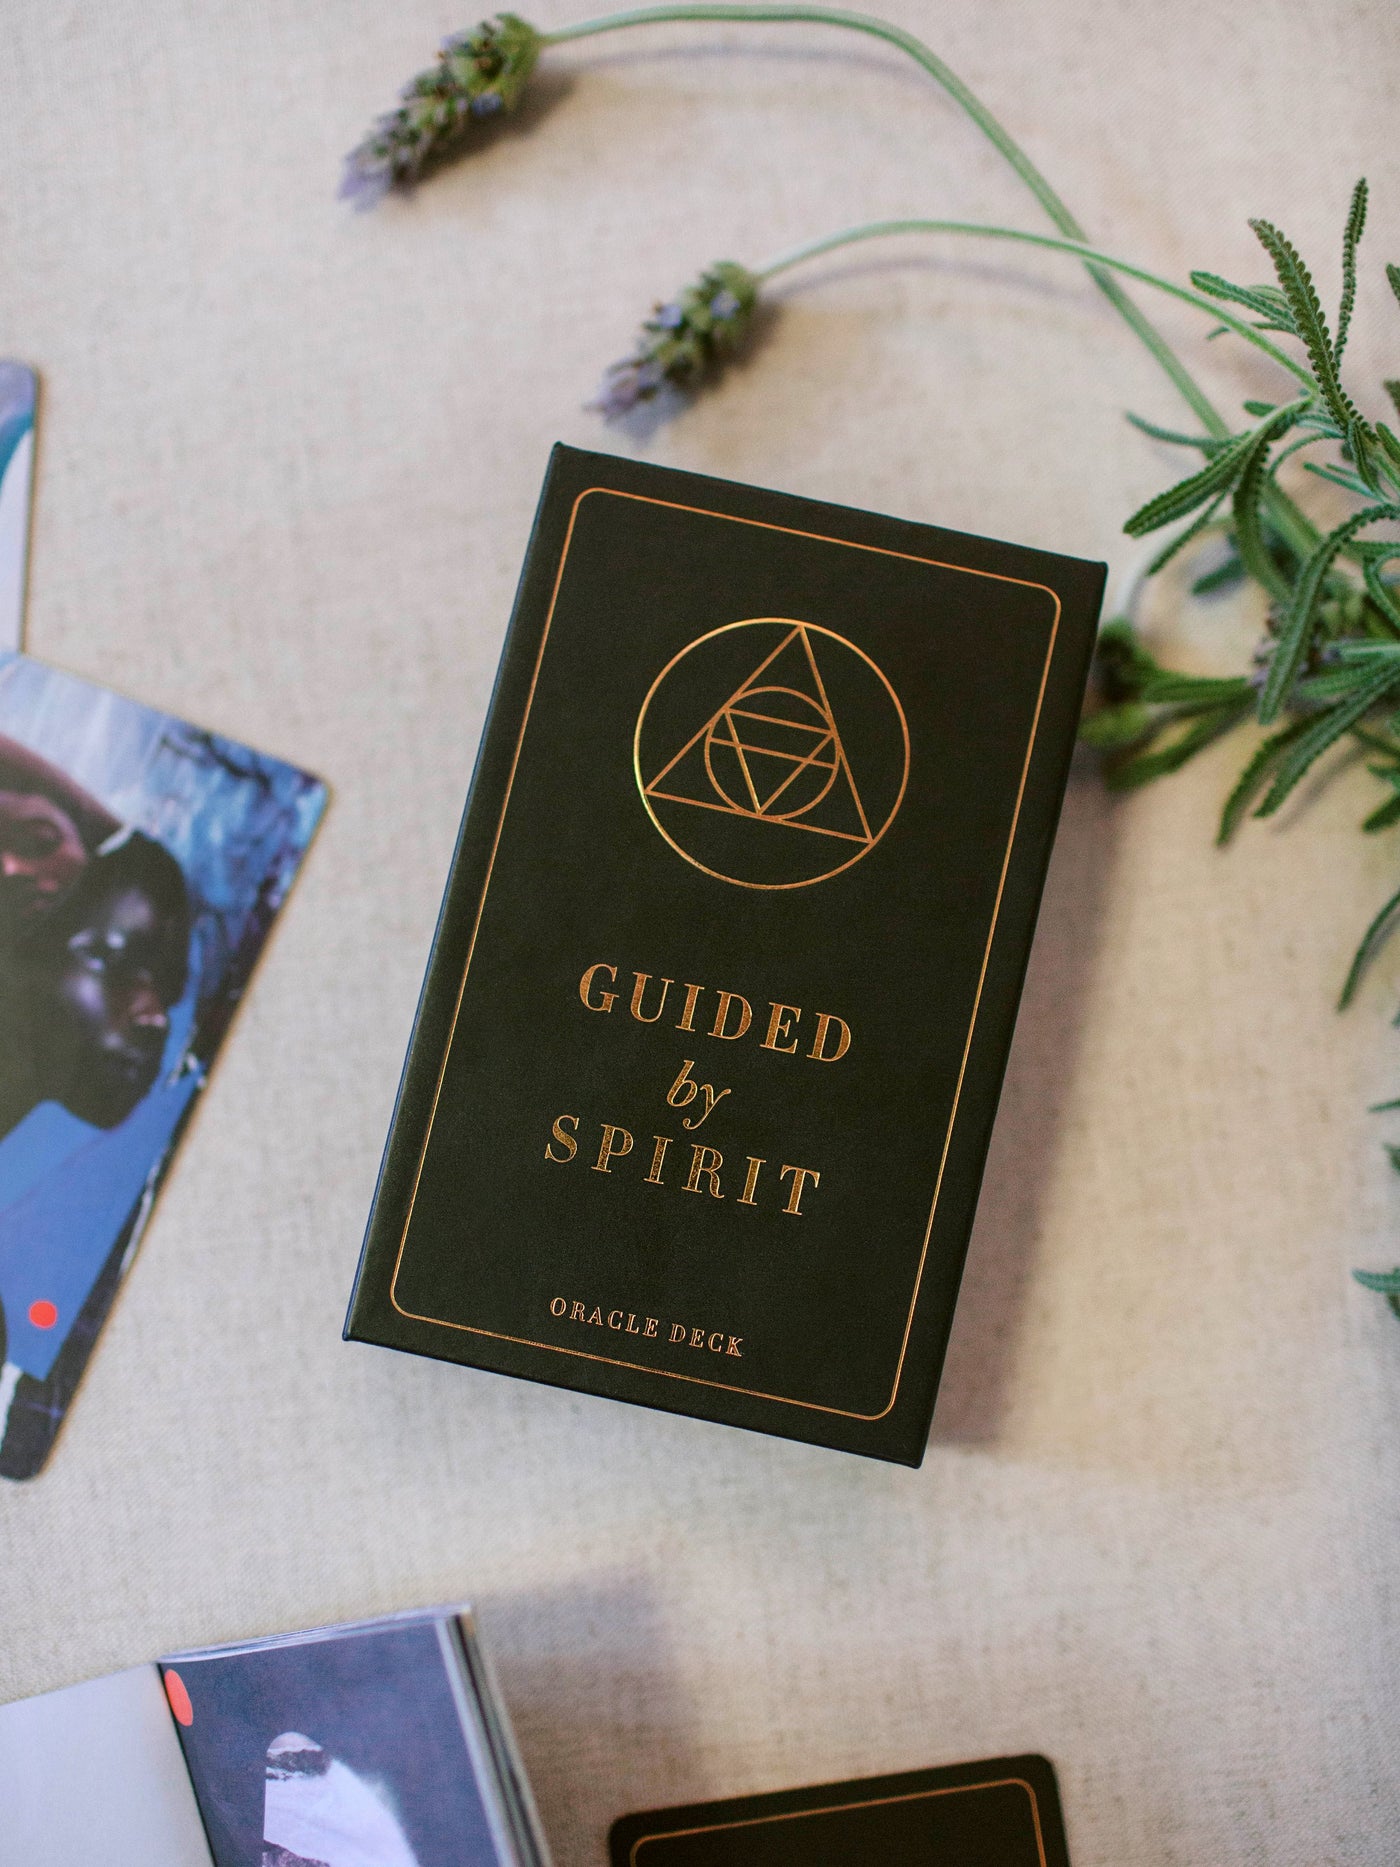 Guided by Sprit Oracle Deck